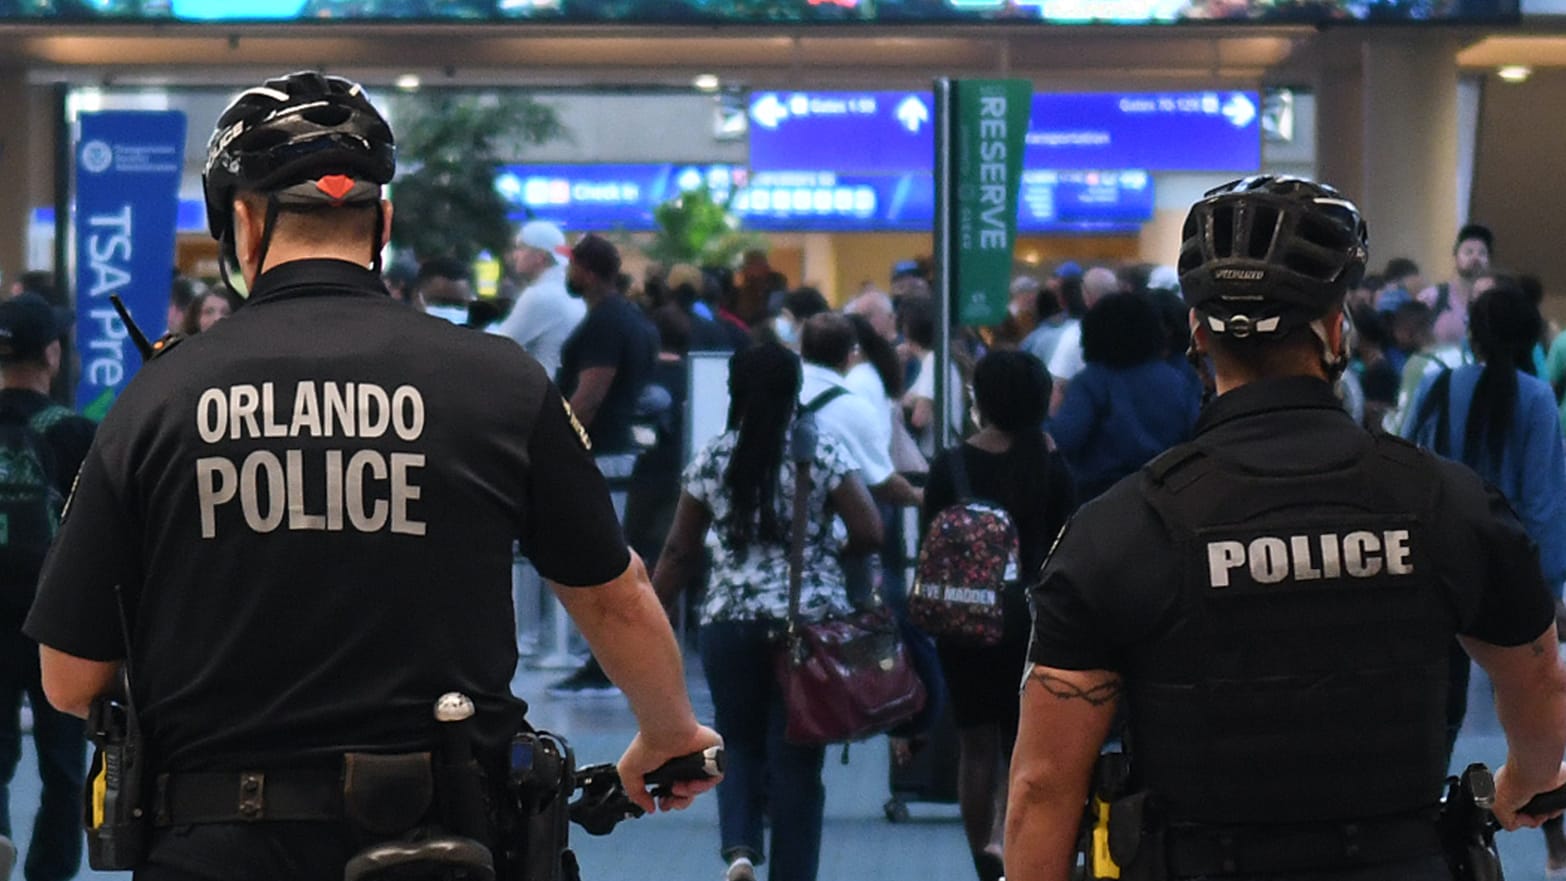 Police officers watch as travelers make their way through a TSA screening line at Orlando International Airport in July 2022.